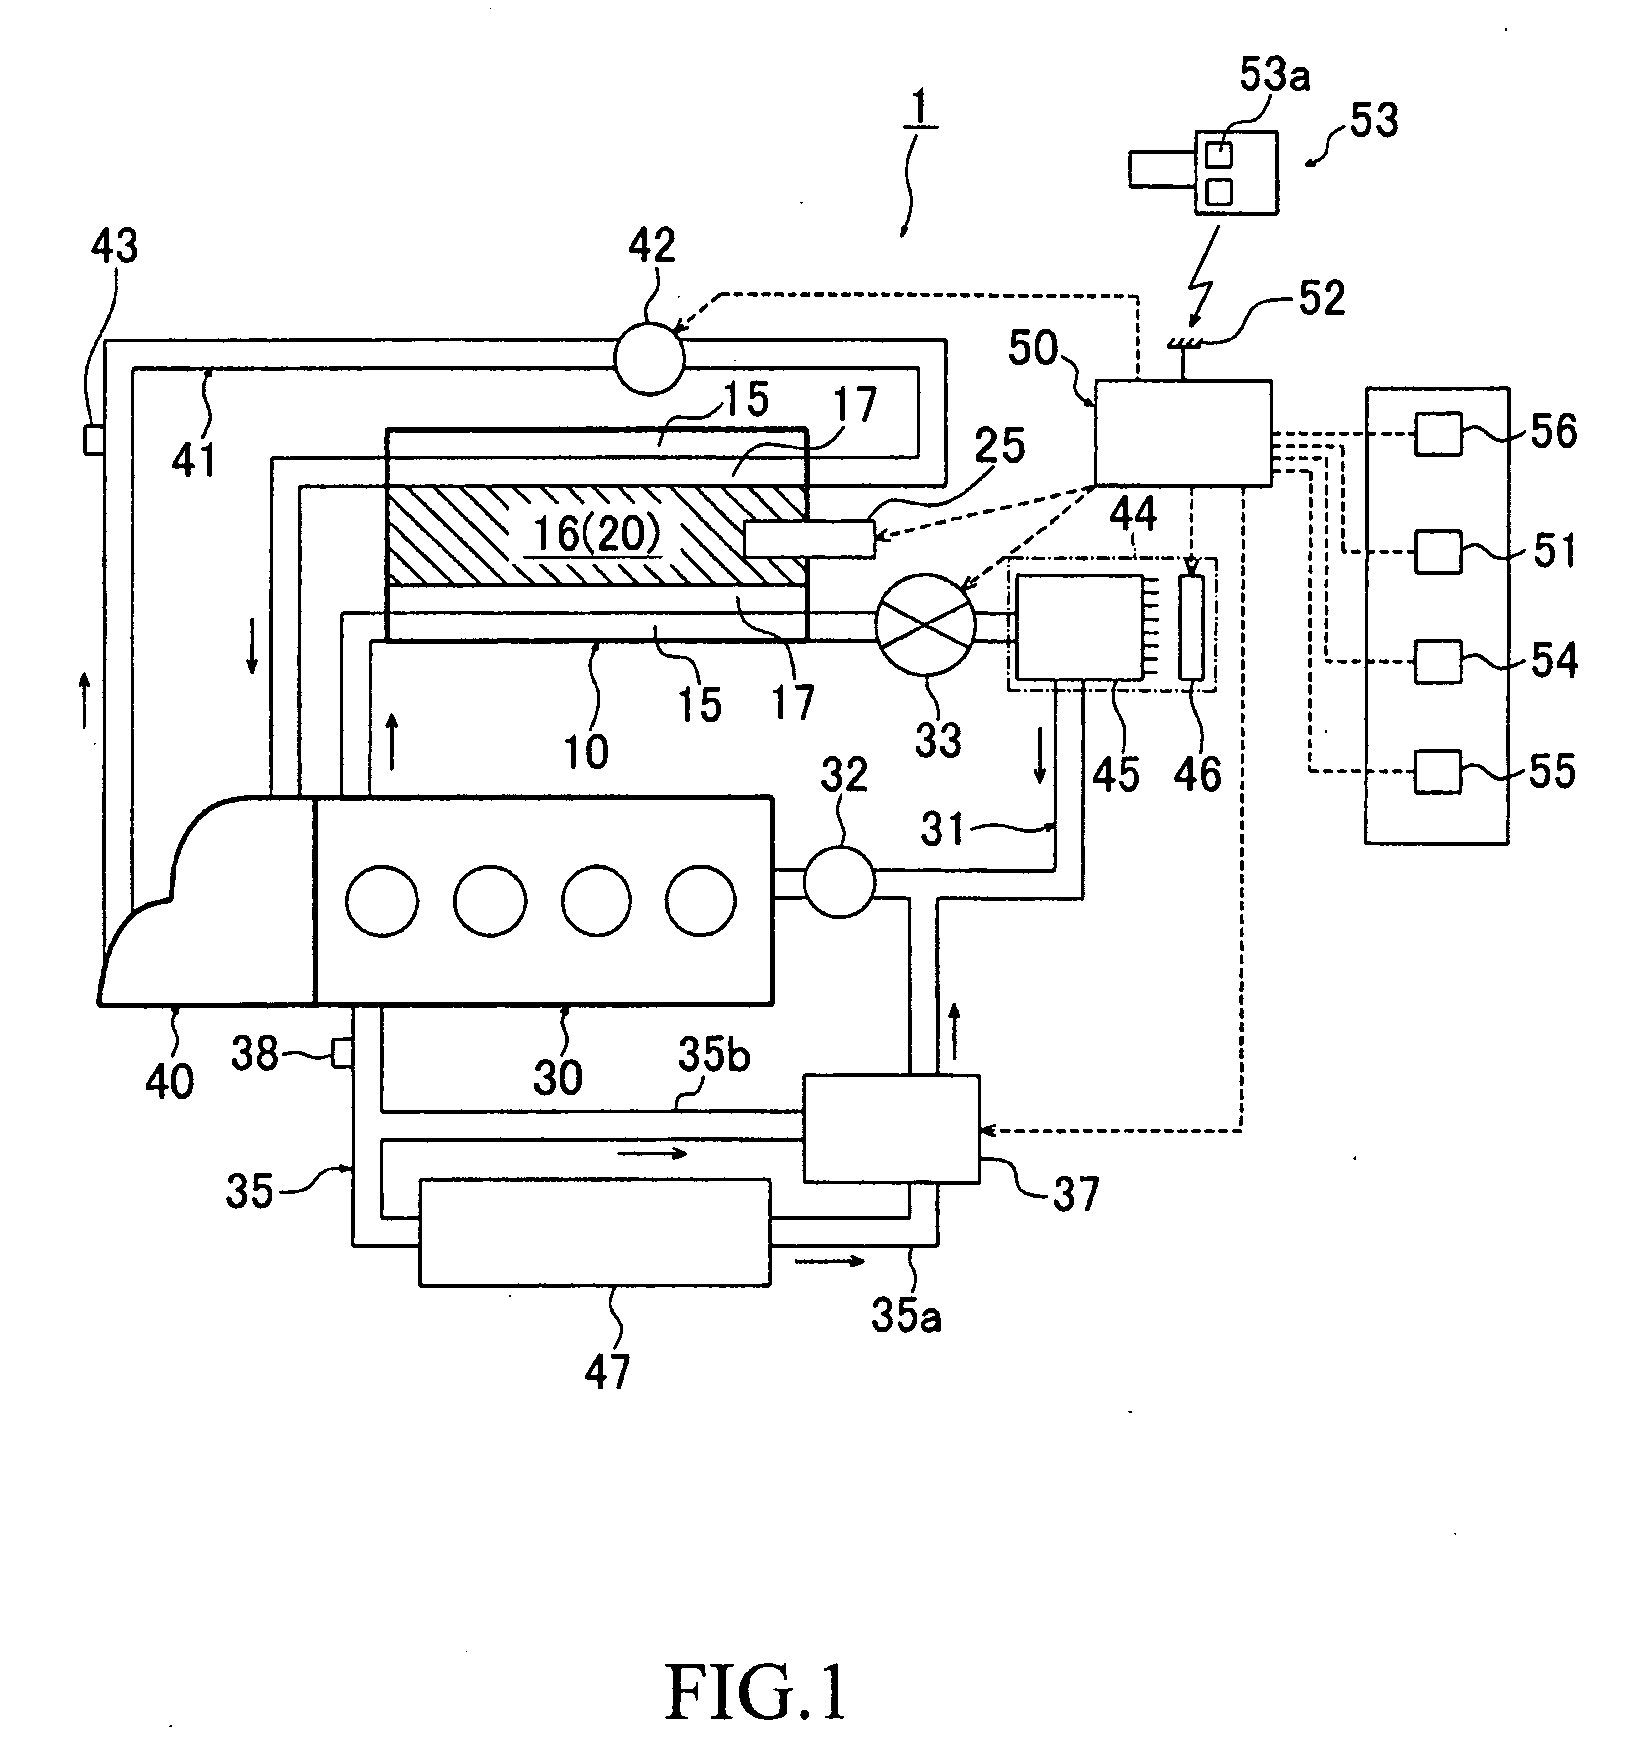 Warming-up system for vehicle